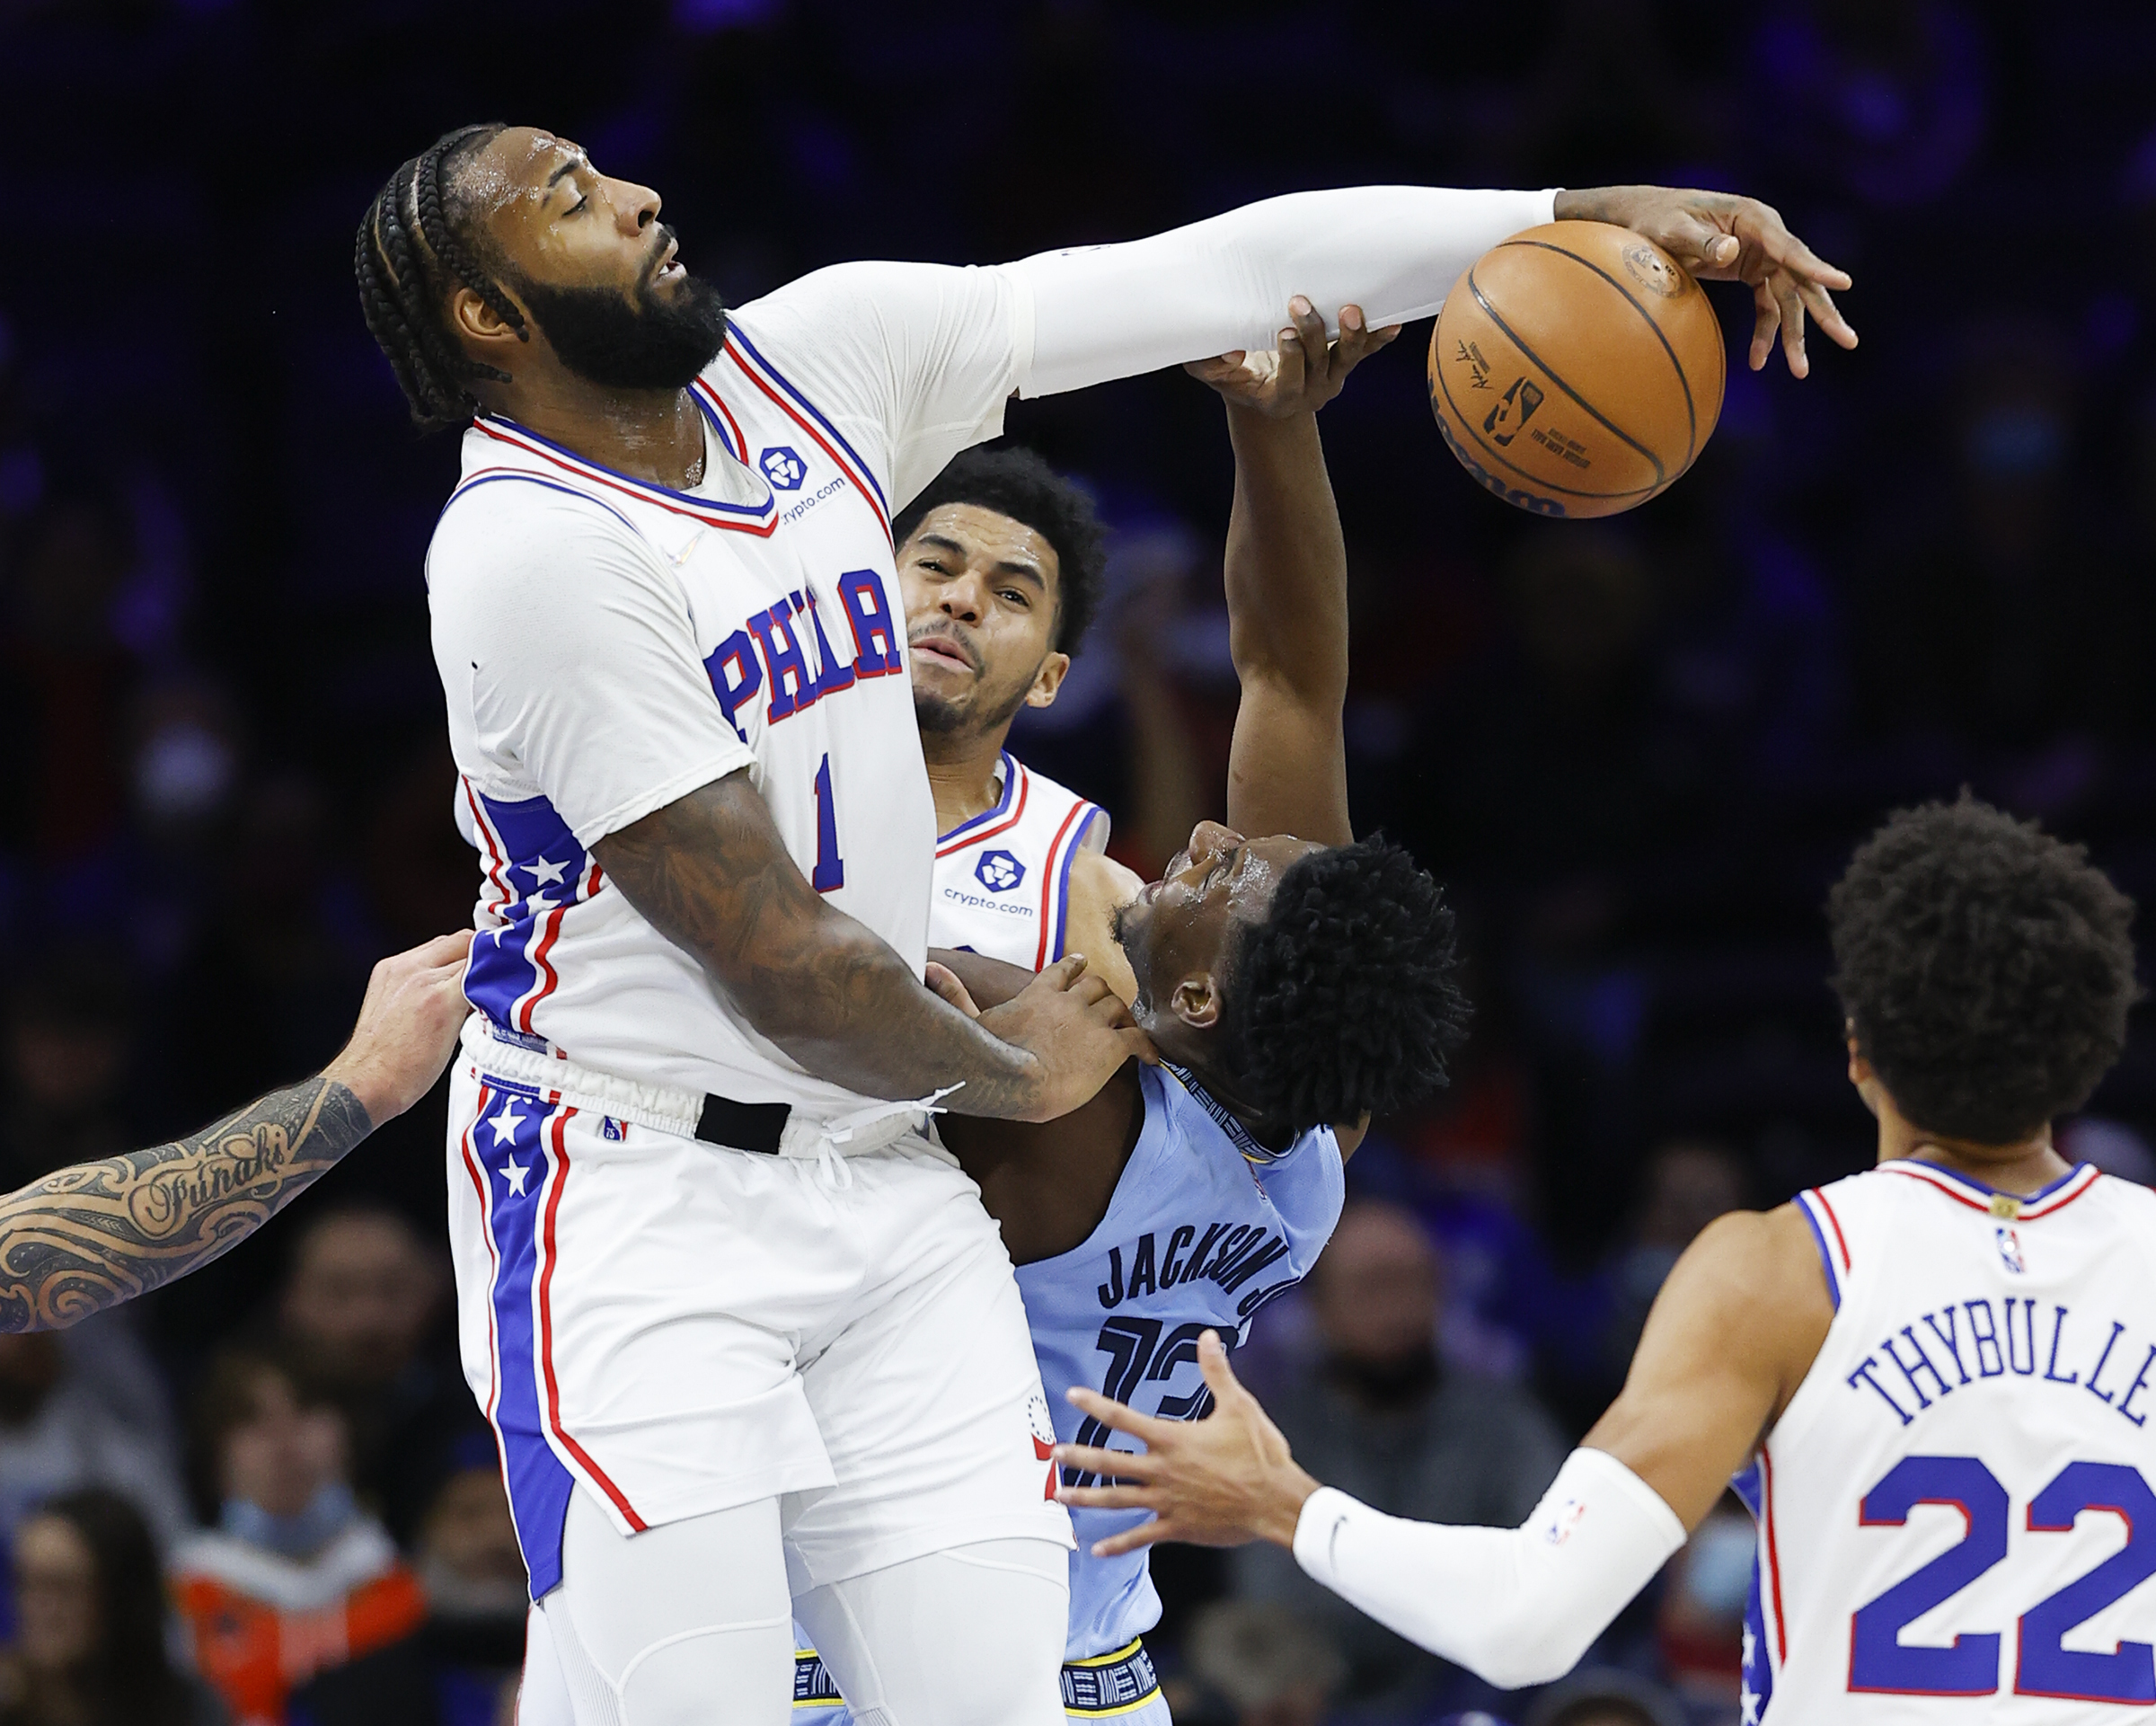 Grizzlies beat Sixers in Morant's return; Pistons add to Heat's woes